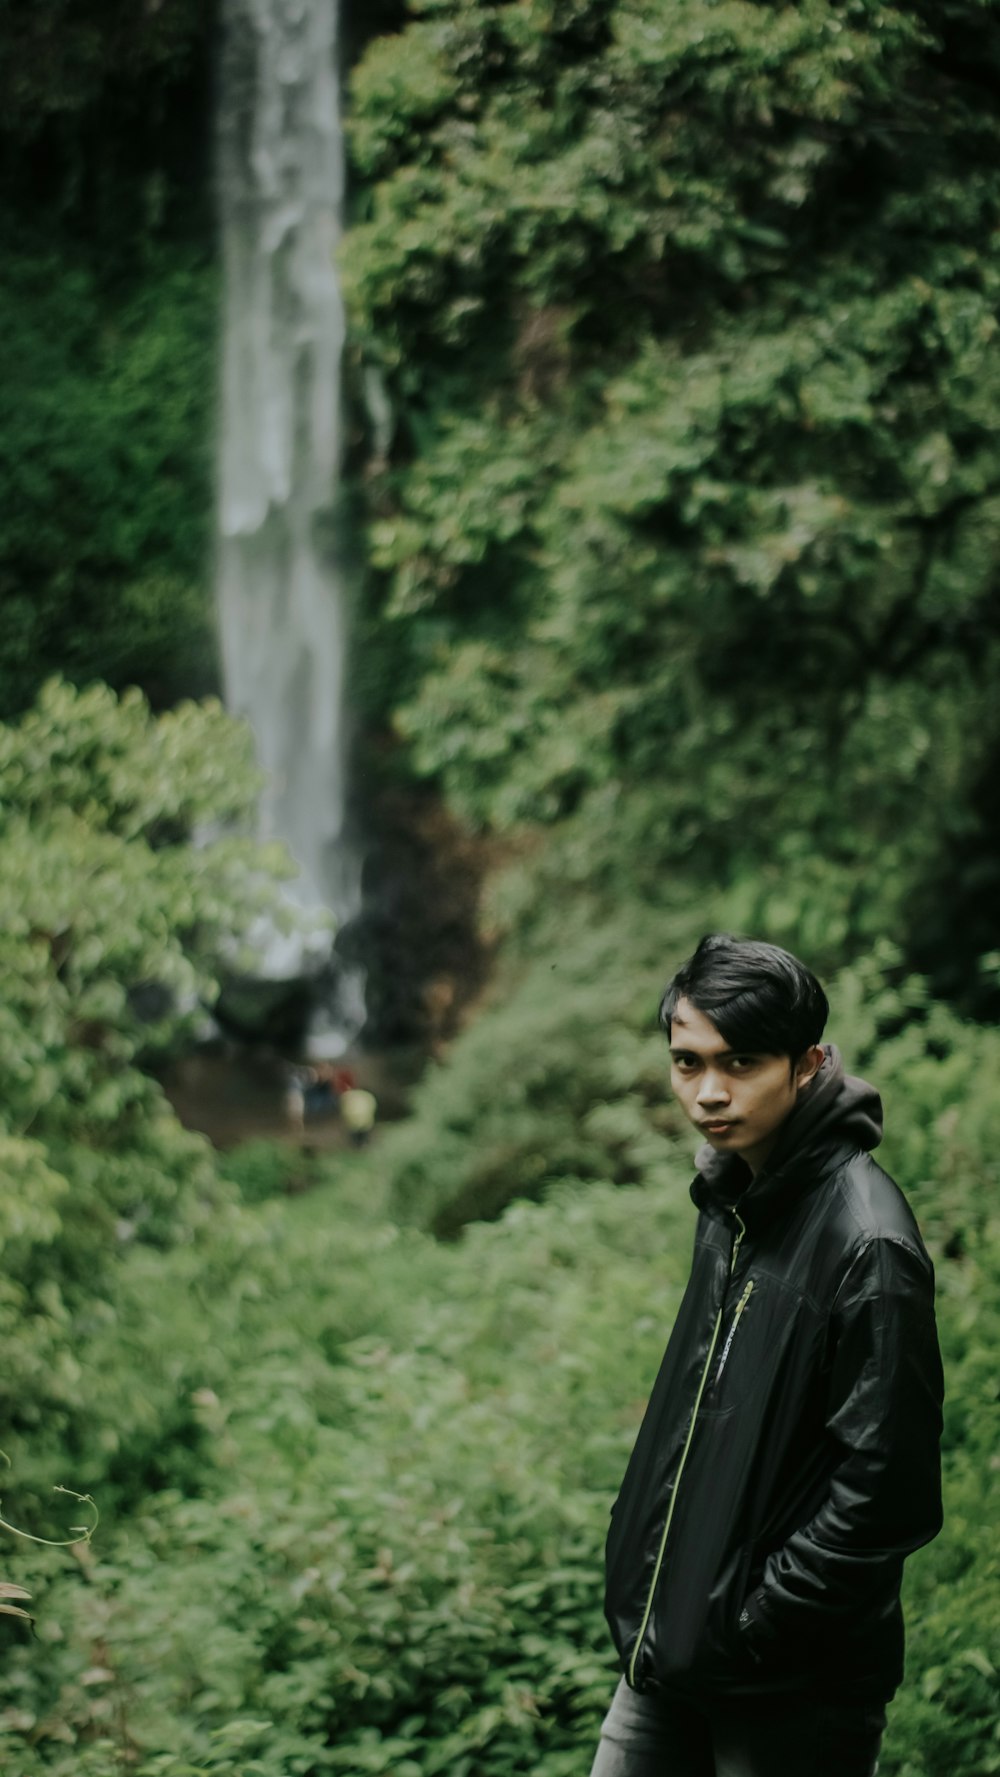 man in black leather jacket standing near green trees during daytime